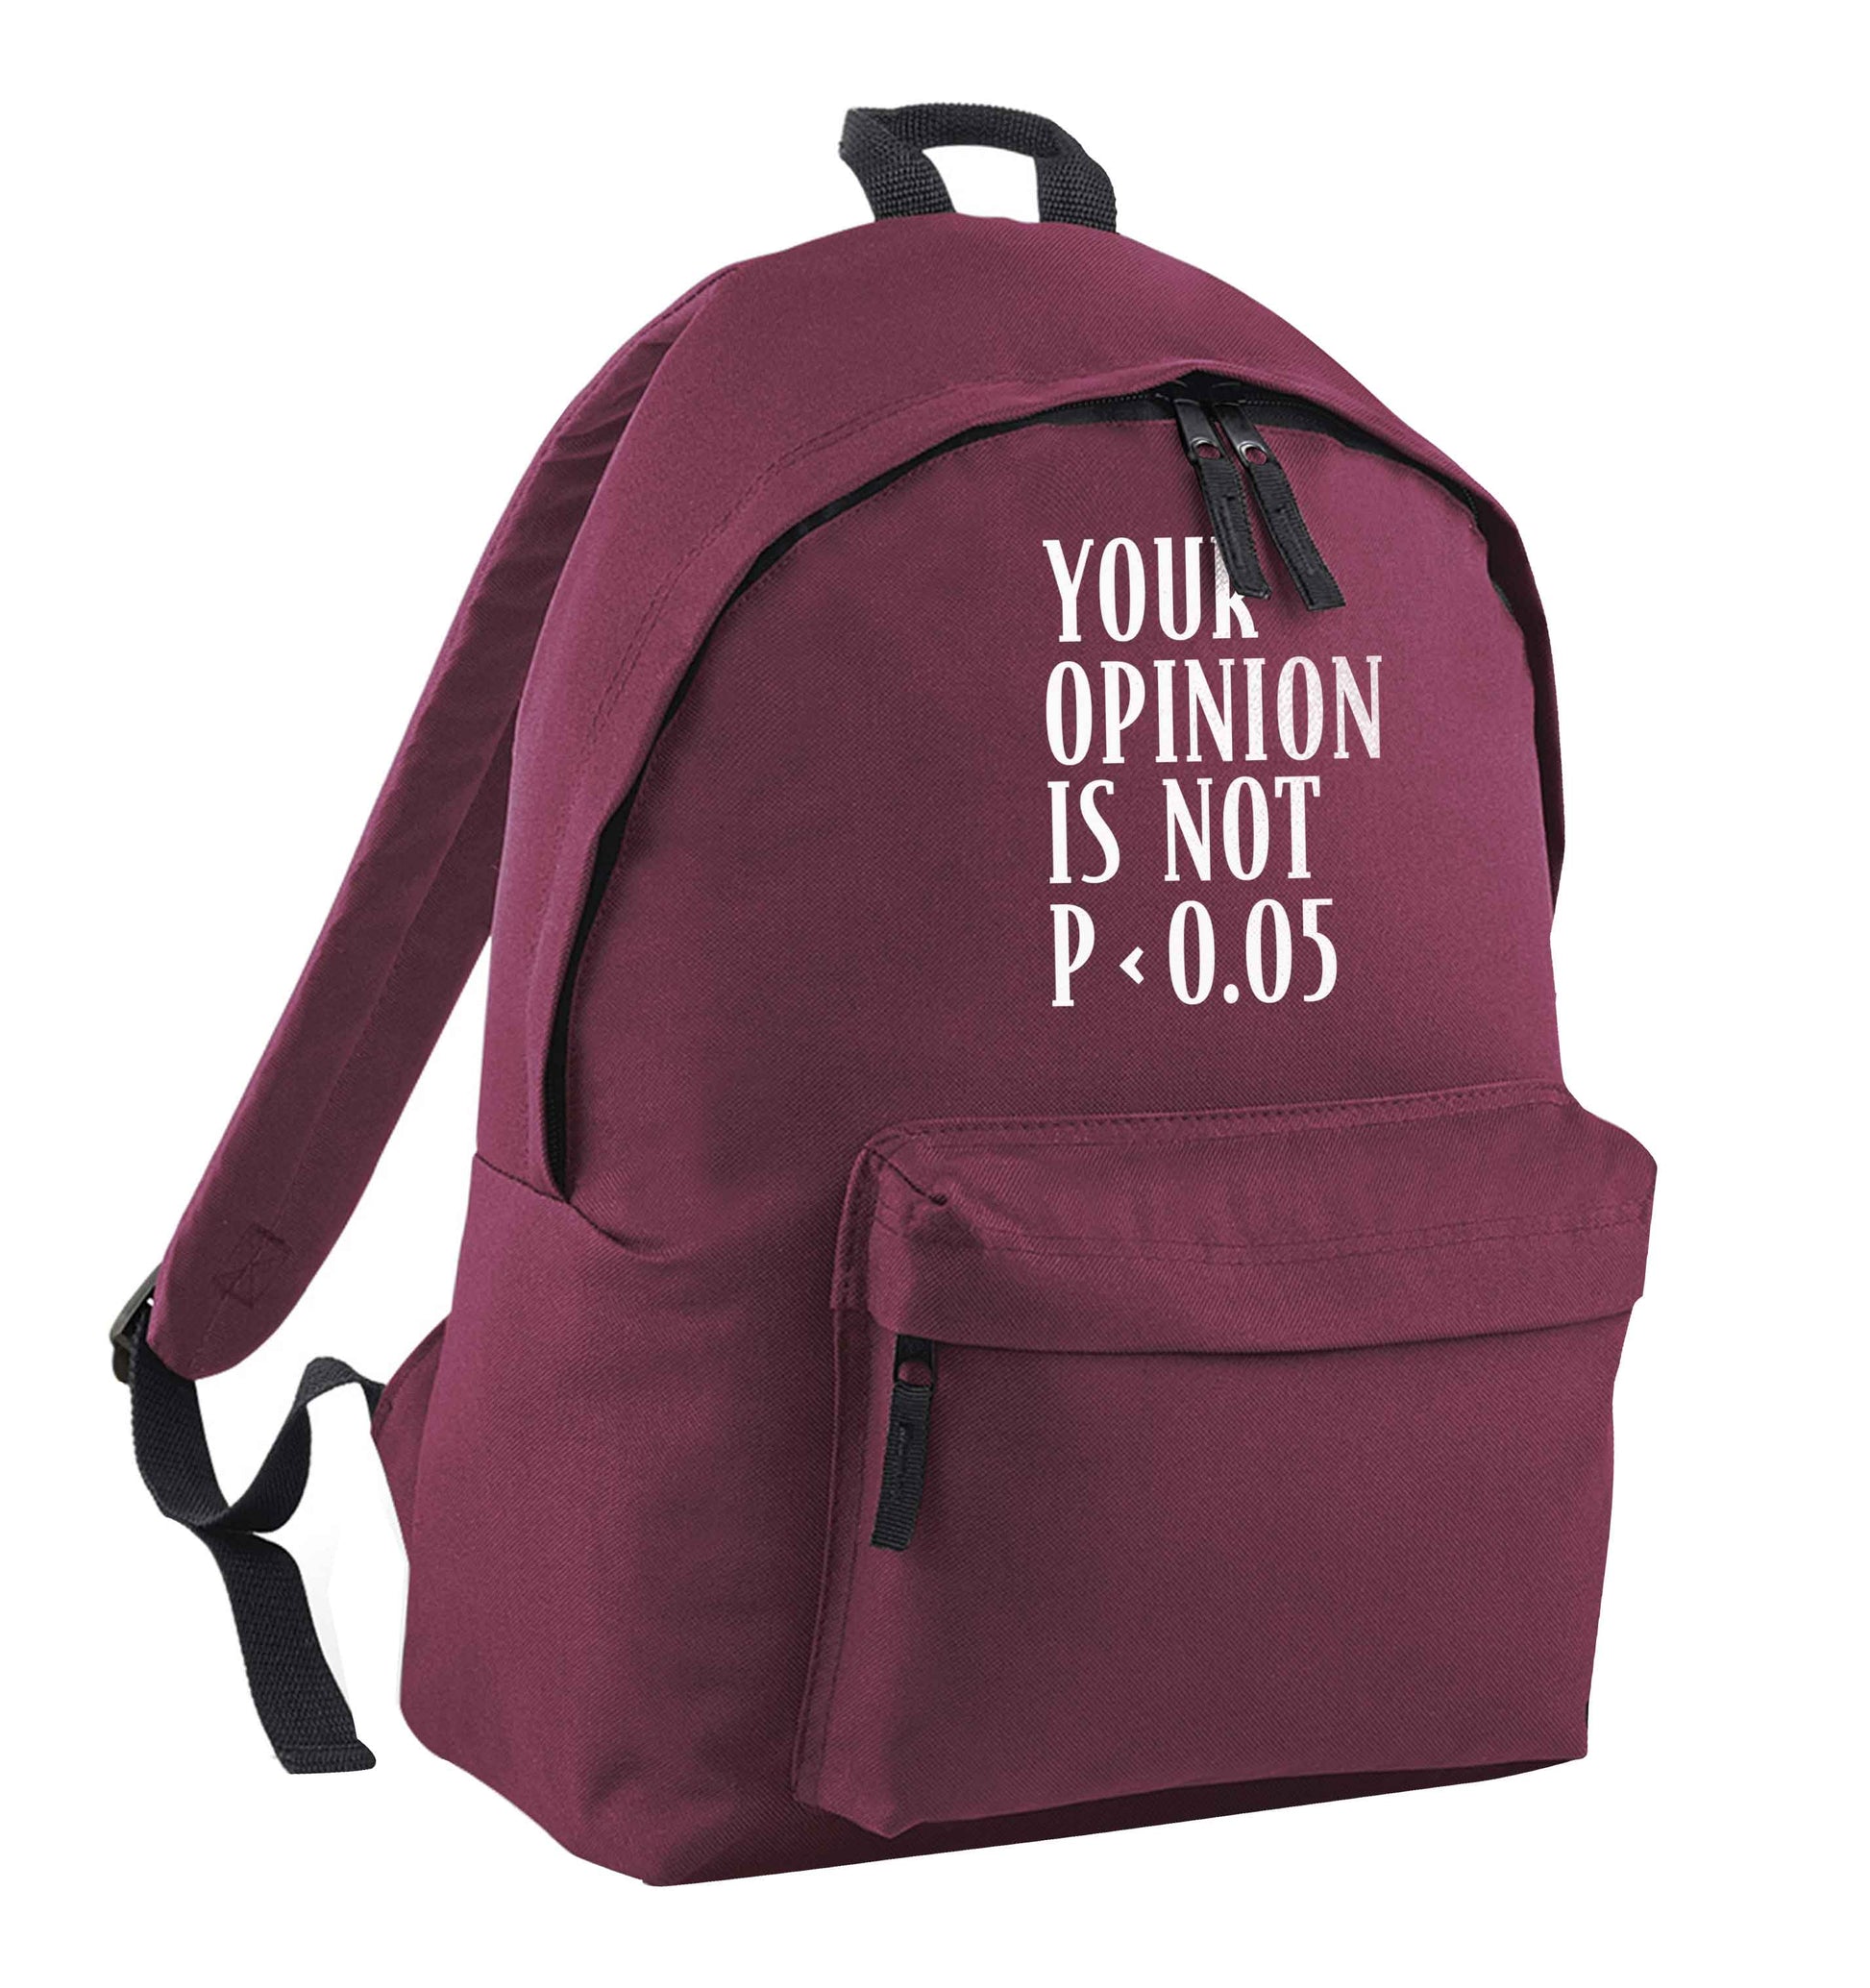 Your opinion is not P < 0.05maroon children's backpack